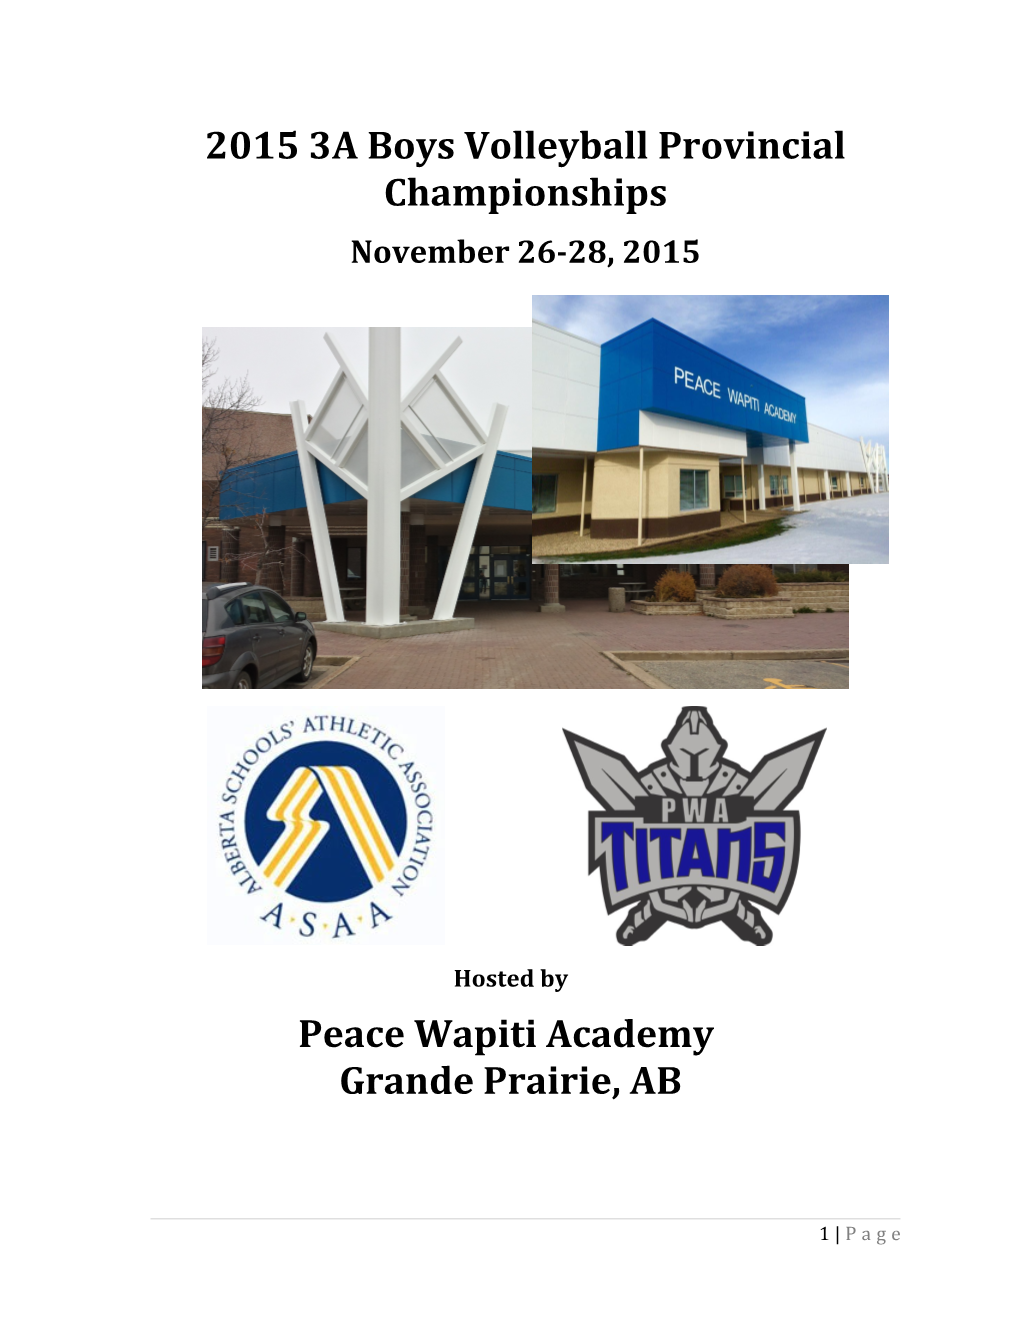 2015 3A Boys Volleyball Provincial Championships